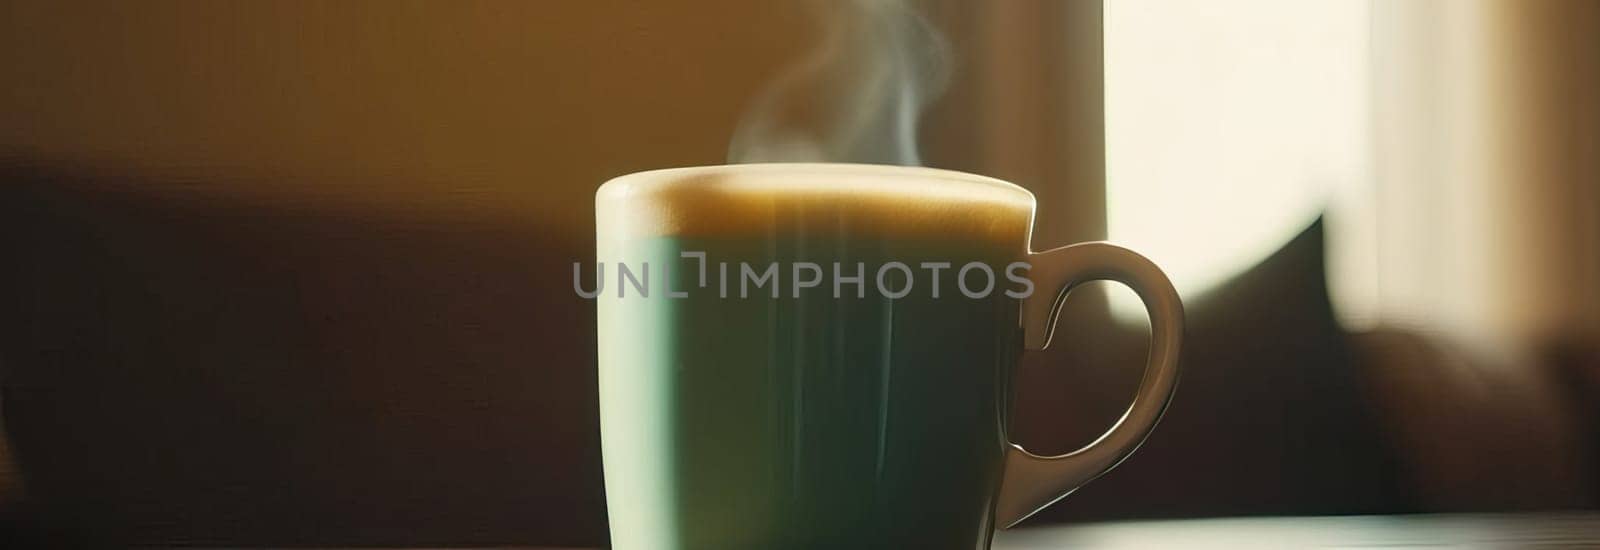 Steaming cup of tea being poured into waiting cup sitting gracefully on wooden table, capturing essence of morning rituals. Rich aroma fills air, promising moment of warmth. Calming moment in busy day